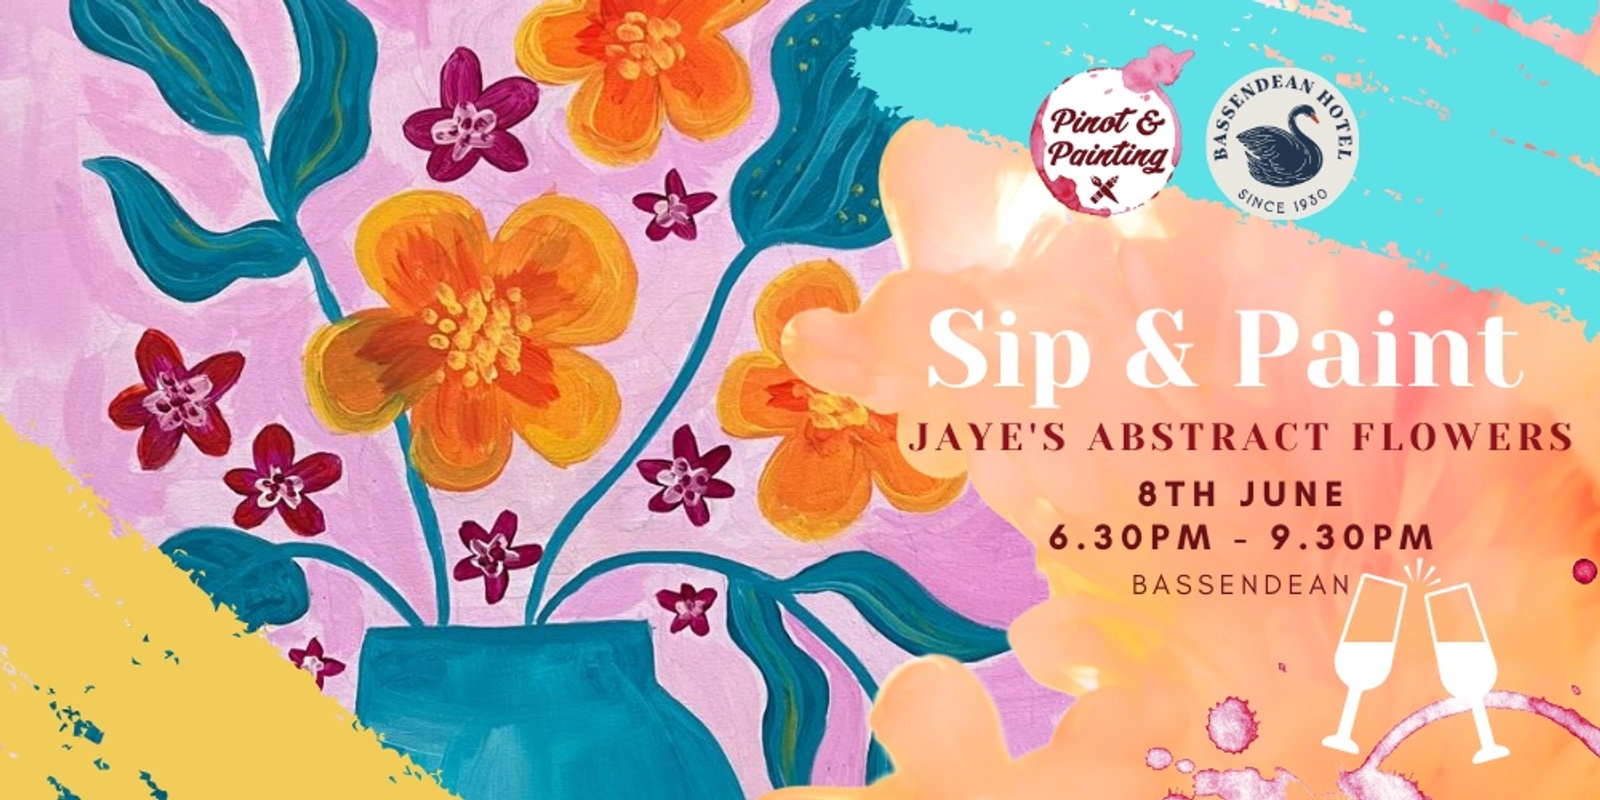 Jaye's Abstract Flowers  - Sip & Paint @ The Bassendean Hotel